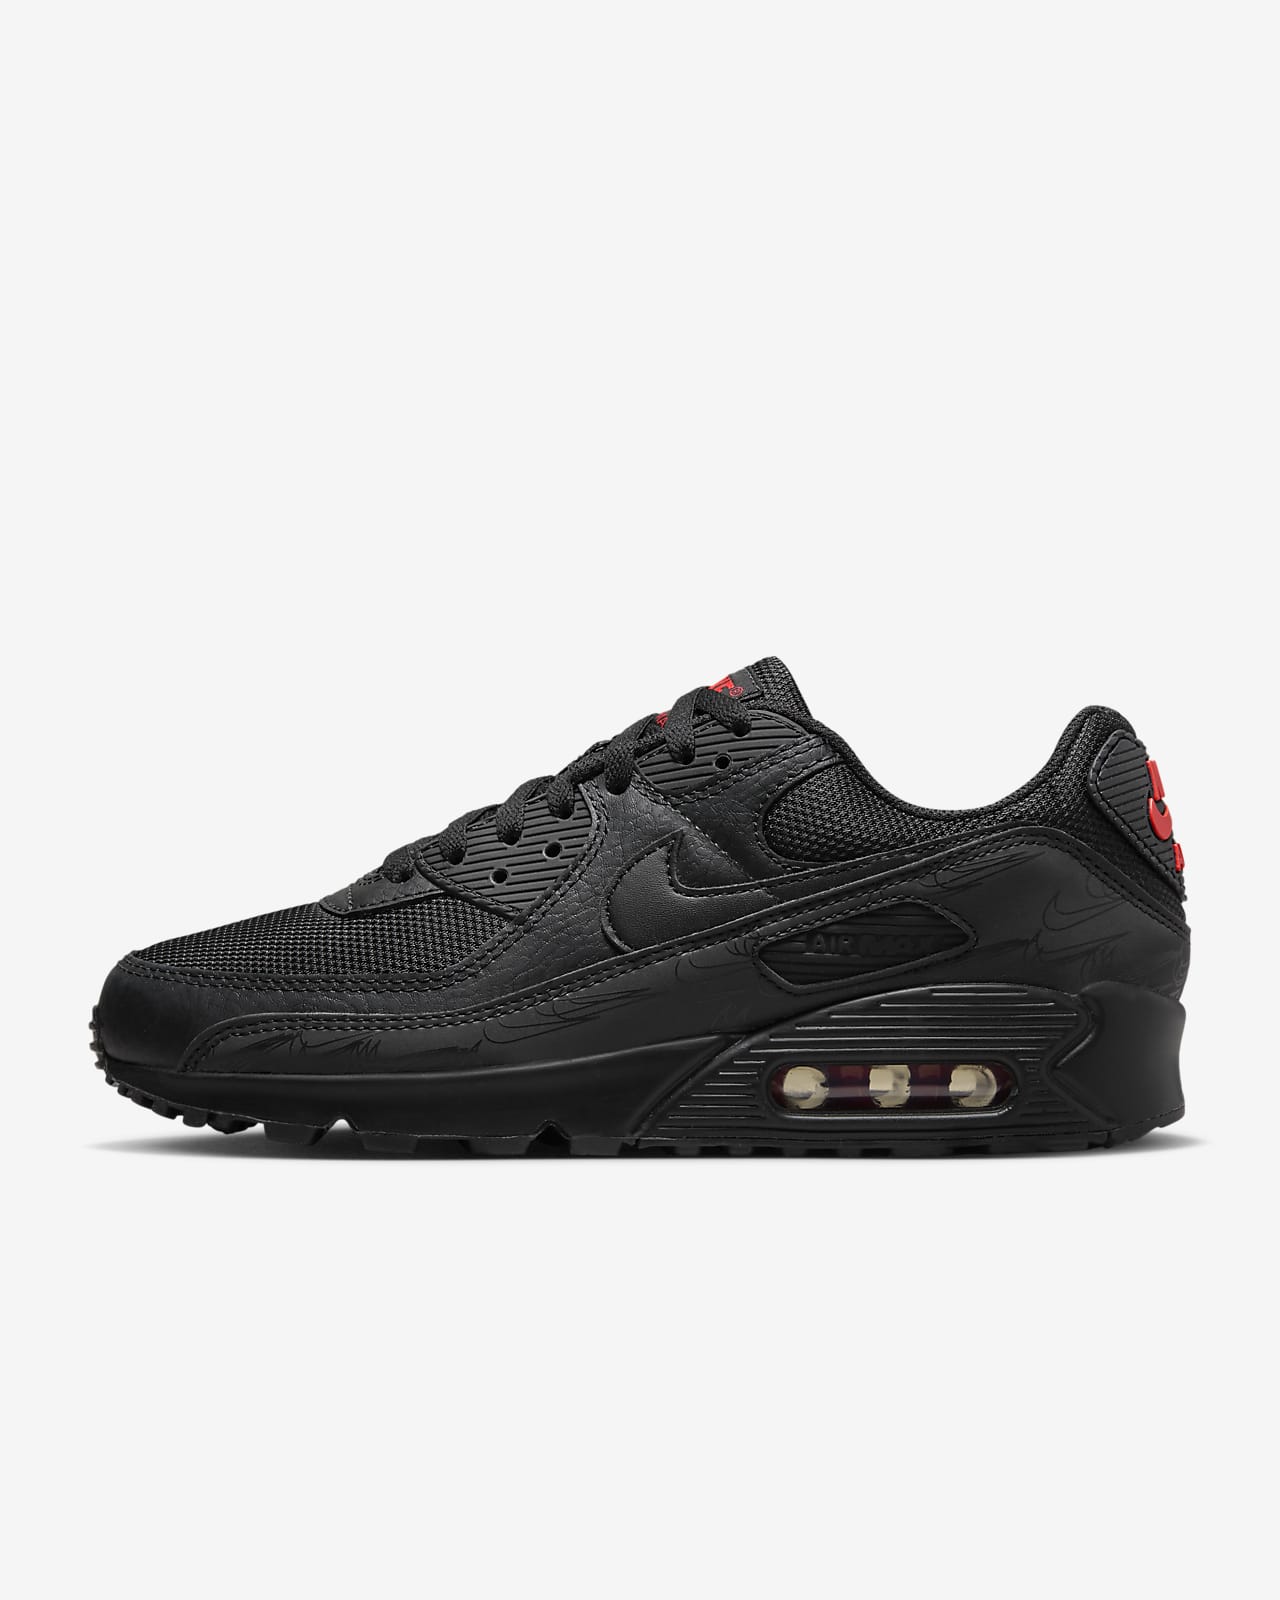 New NIKE Air Max 90 Men's classic Athletic Sneakers shoes triple black all  sizes